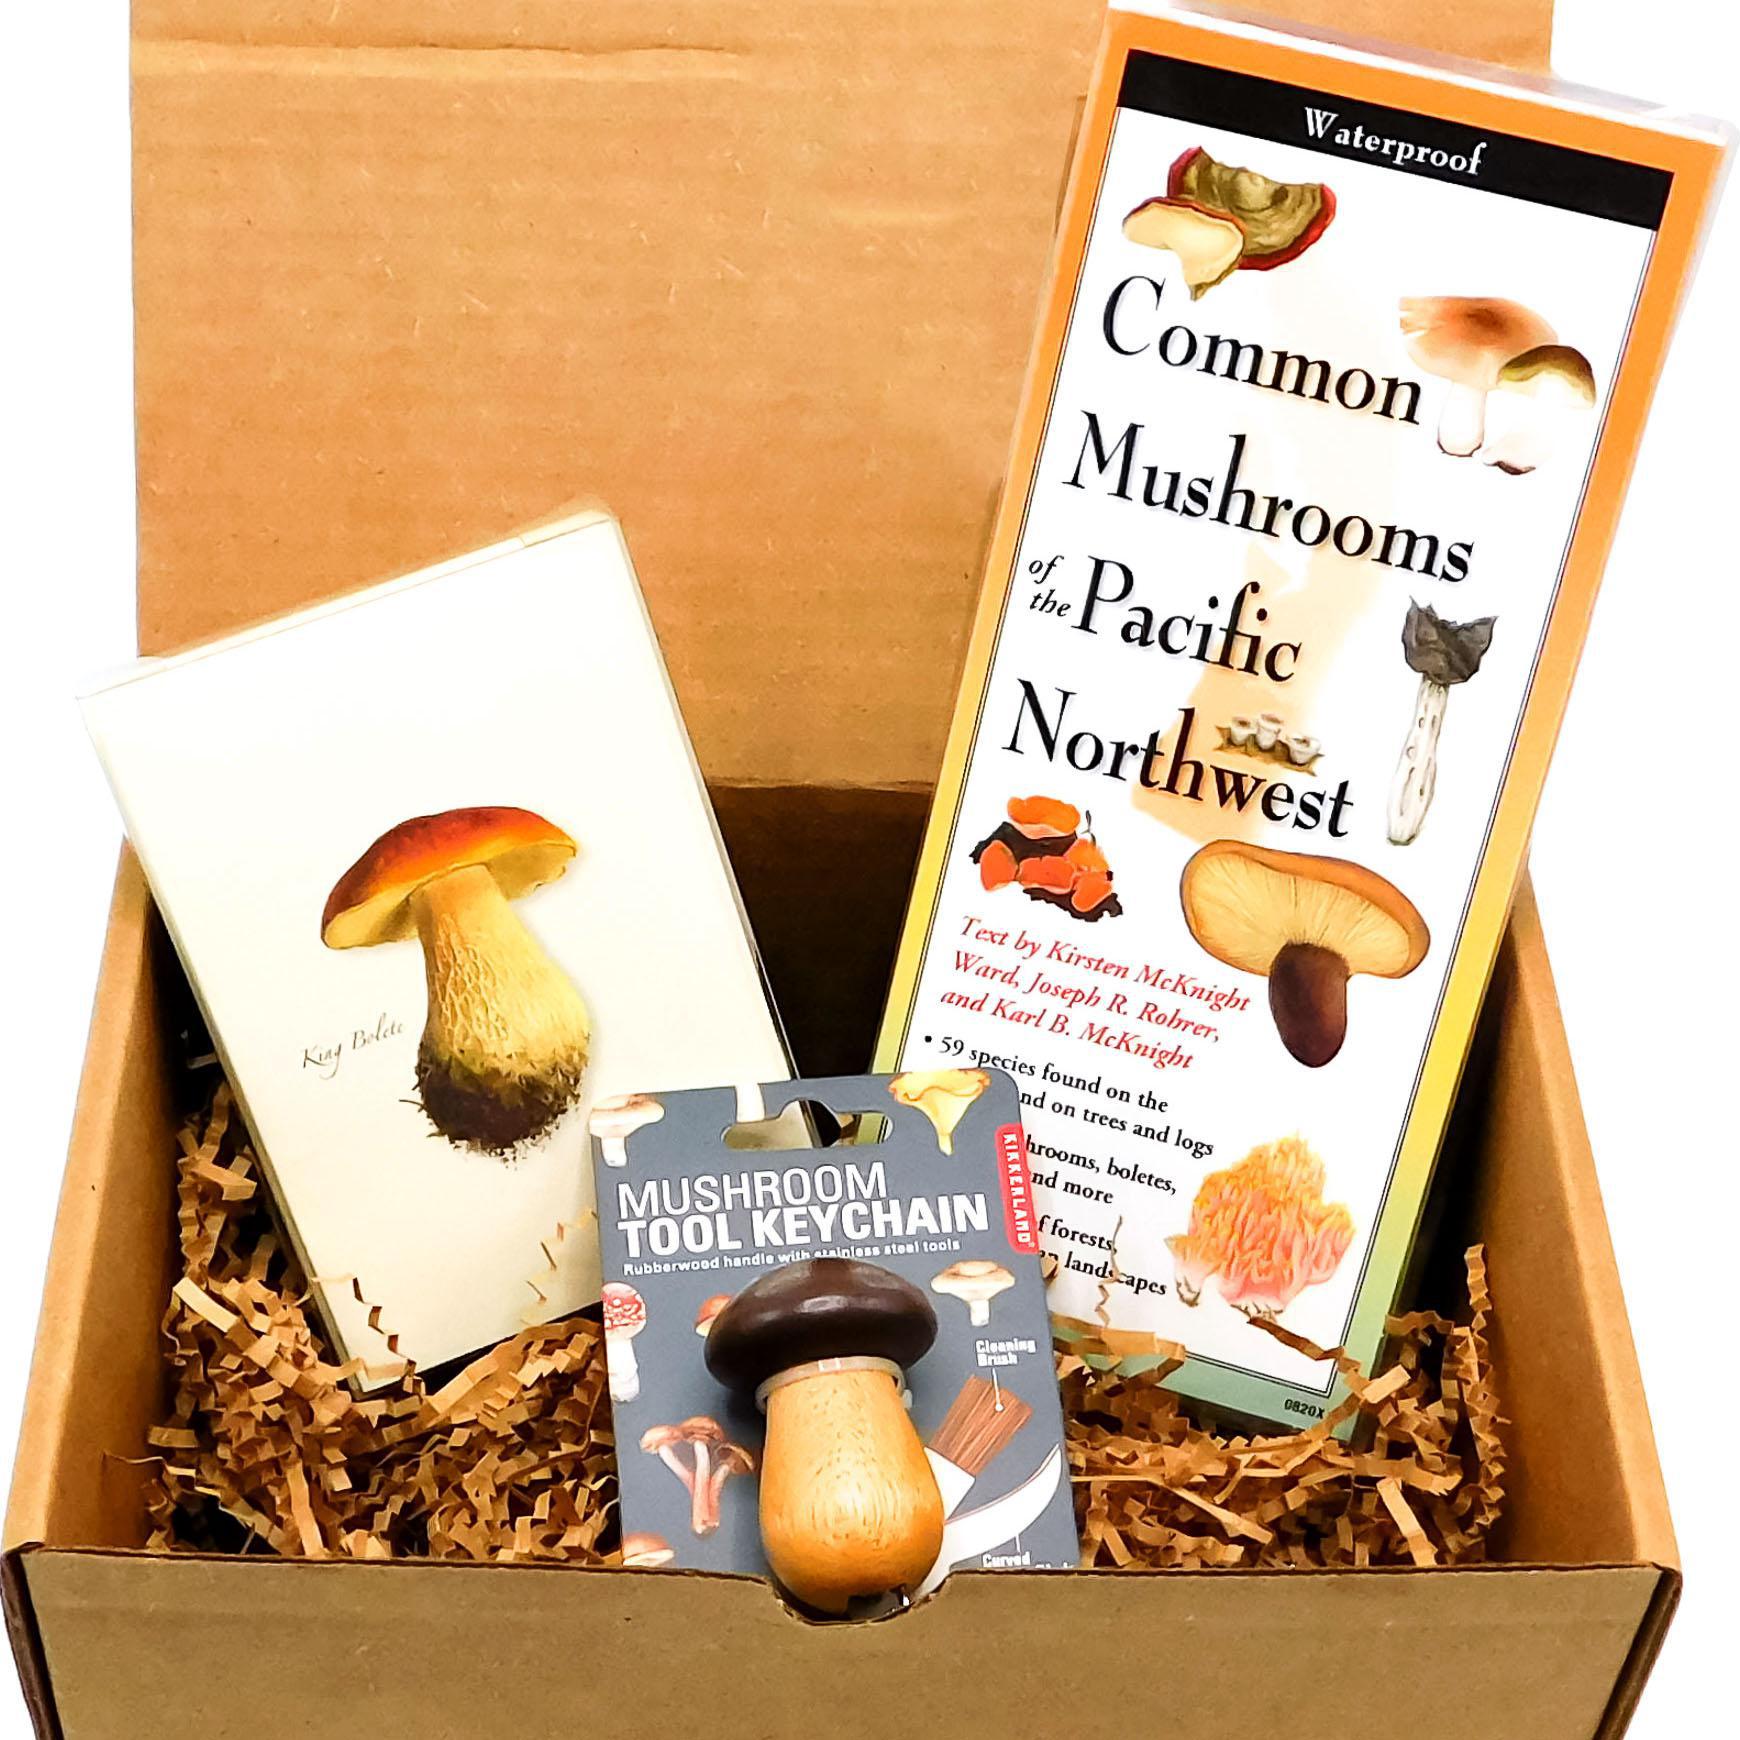 fun box that includes a guide of common mushrooms from the Pacific Northwest, boxed blank notes with mushroom drawings, and a mushroom tool keychain